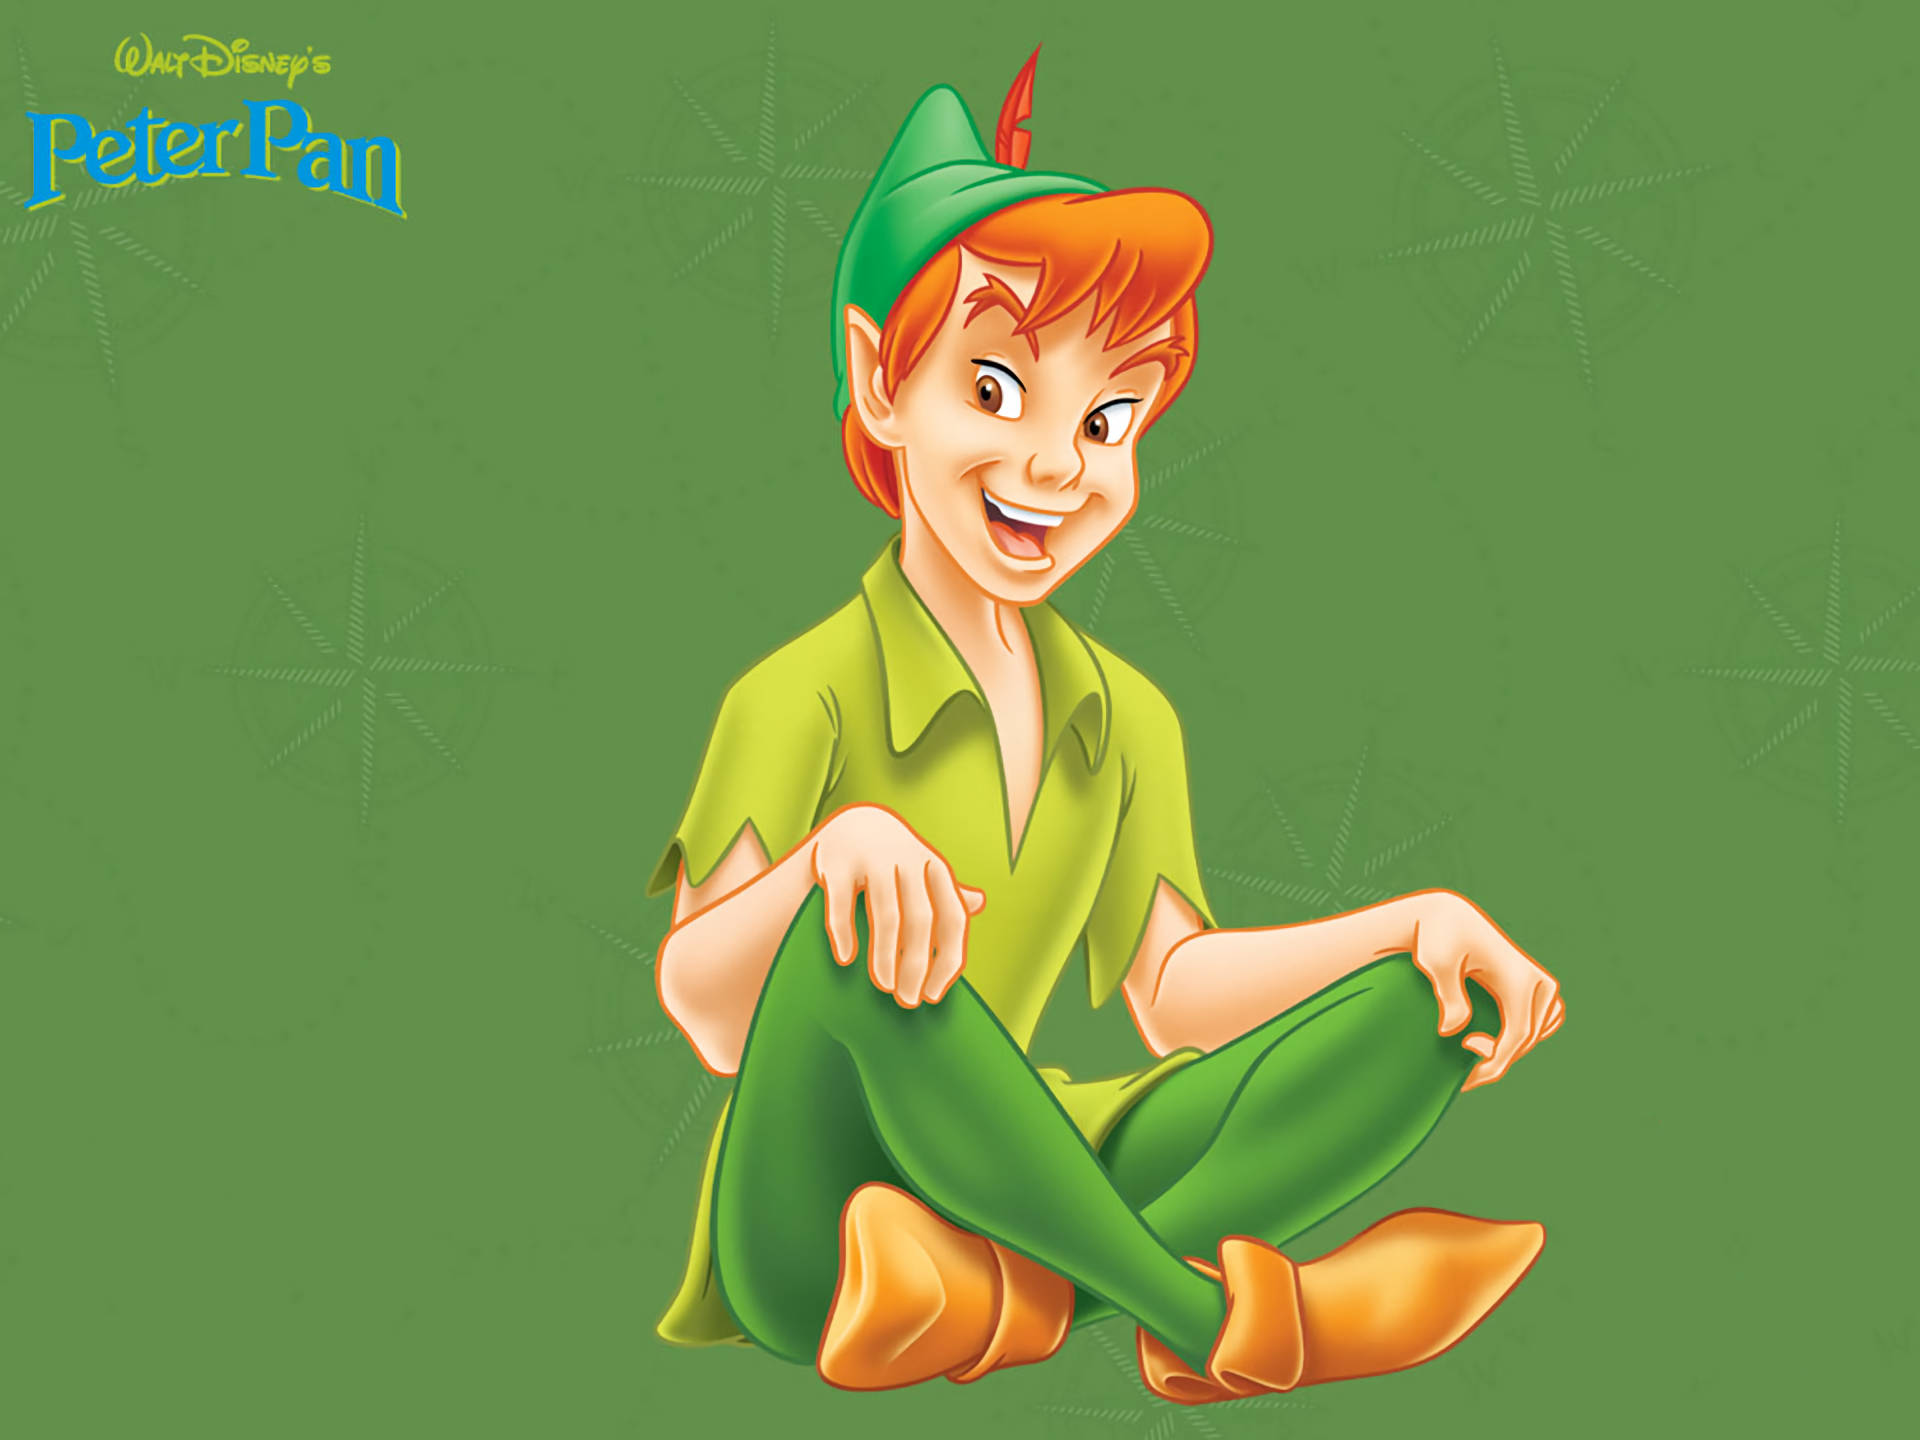 Peter Pan Green Poster Background